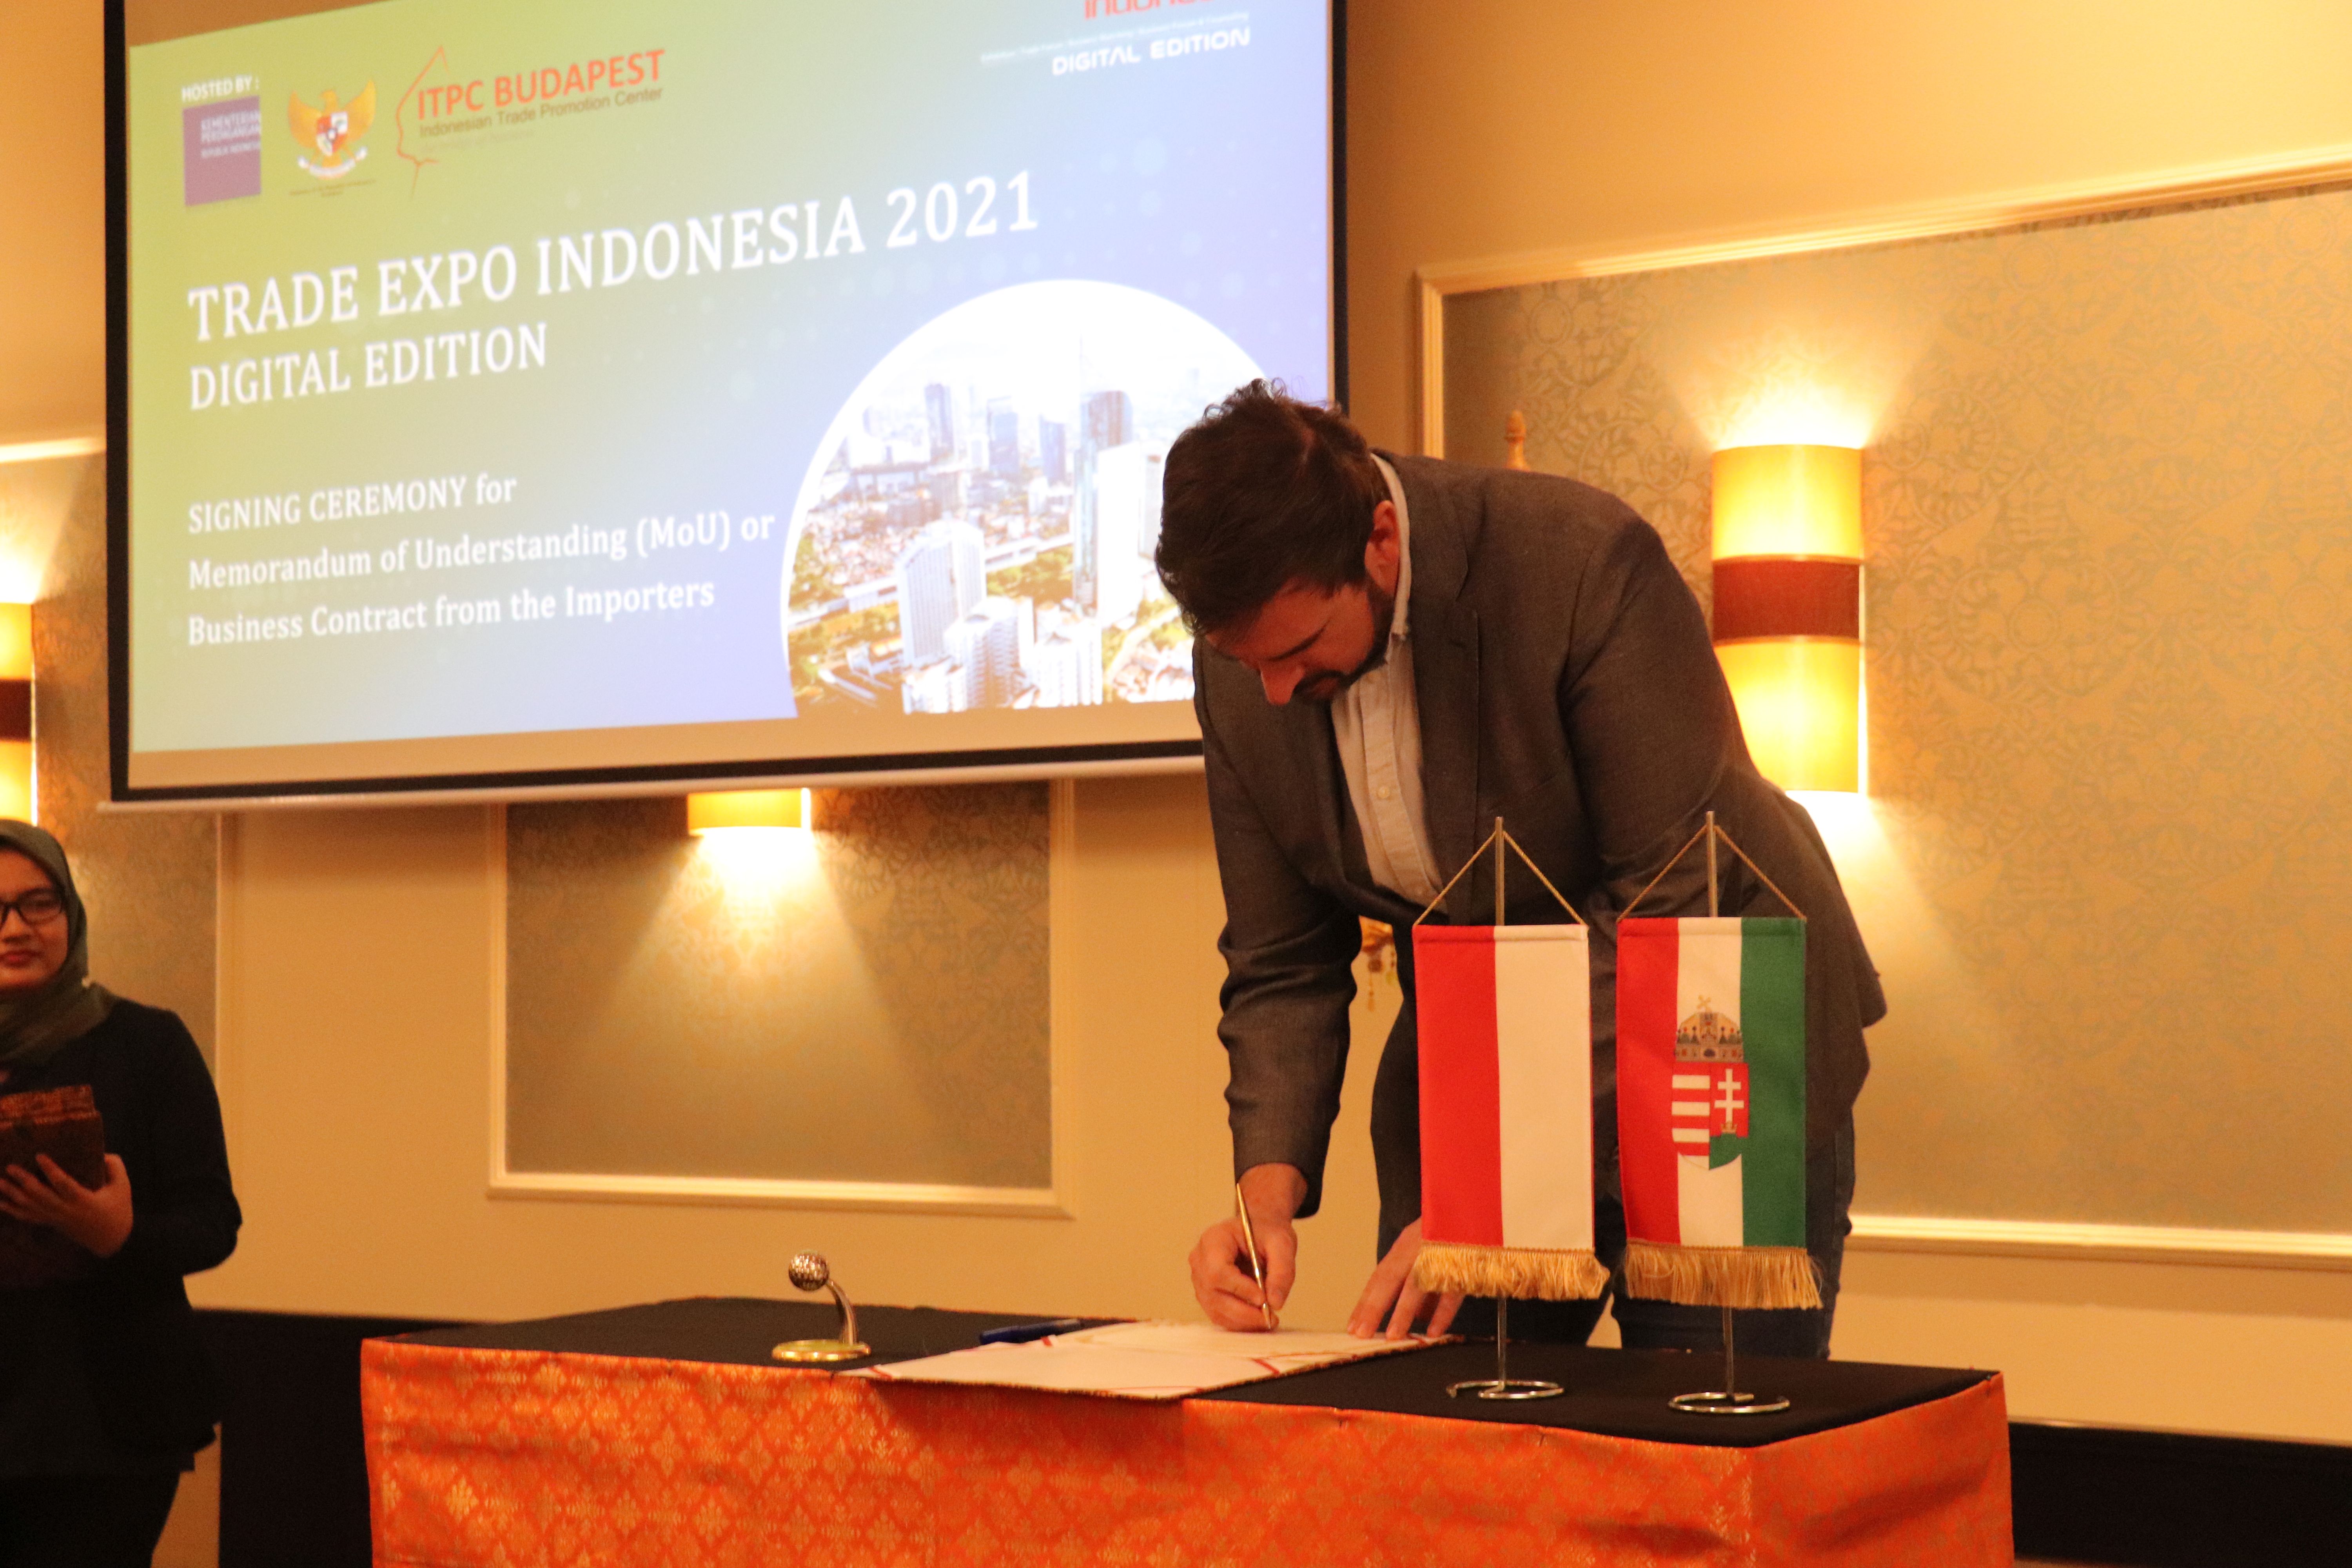 Opening Ceremony of the Trade Expo Indonesia Digital Edition 2021 in Budapest